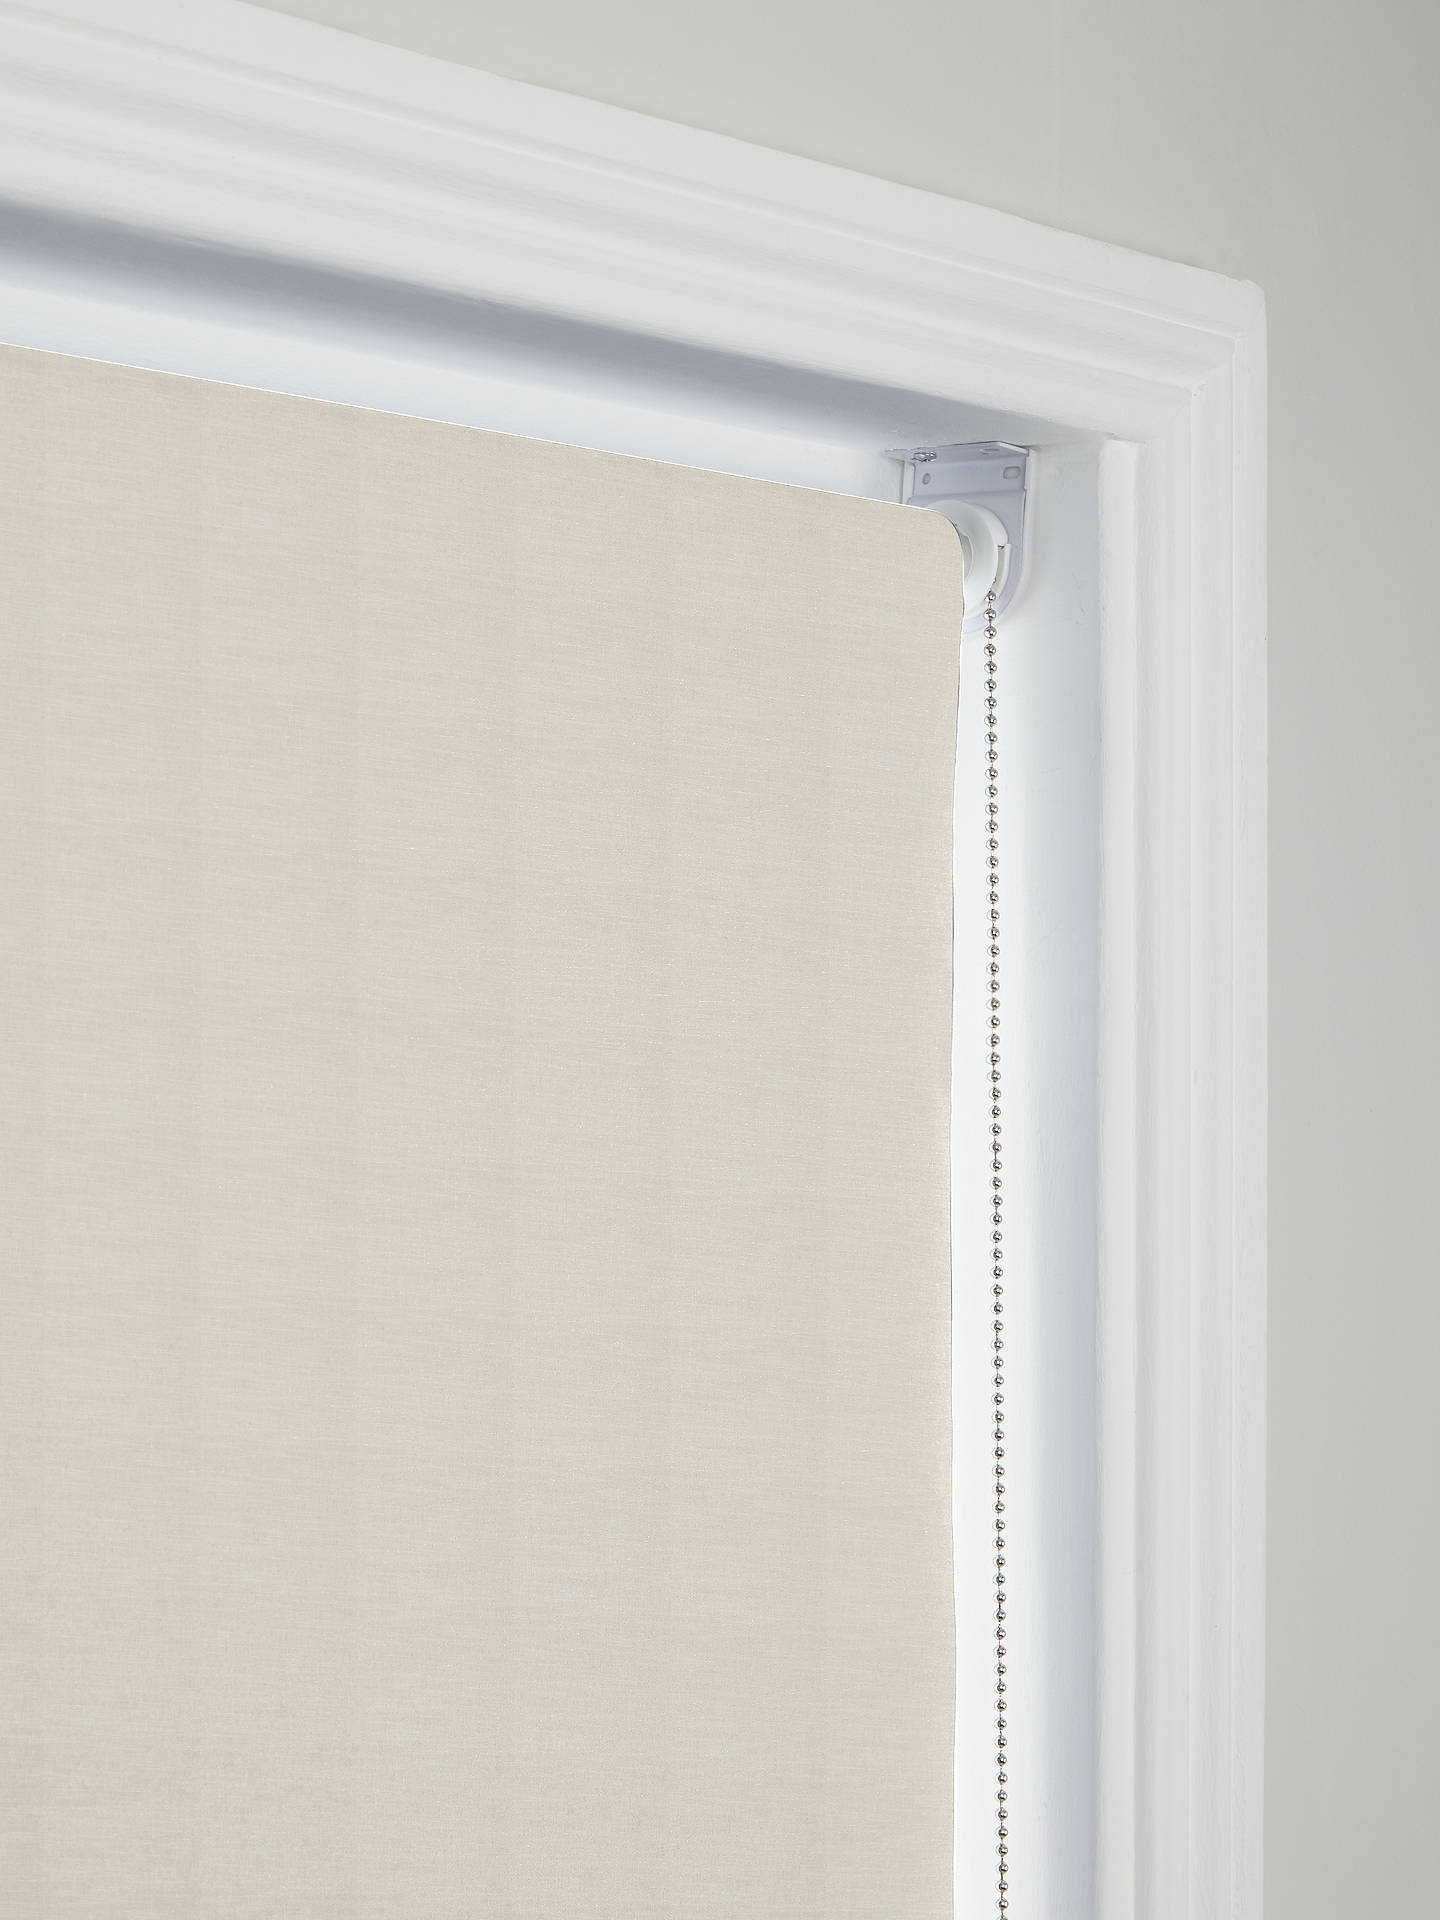 John Lewis Lima Made to Measure Daylight Roller Blind, Cashmere